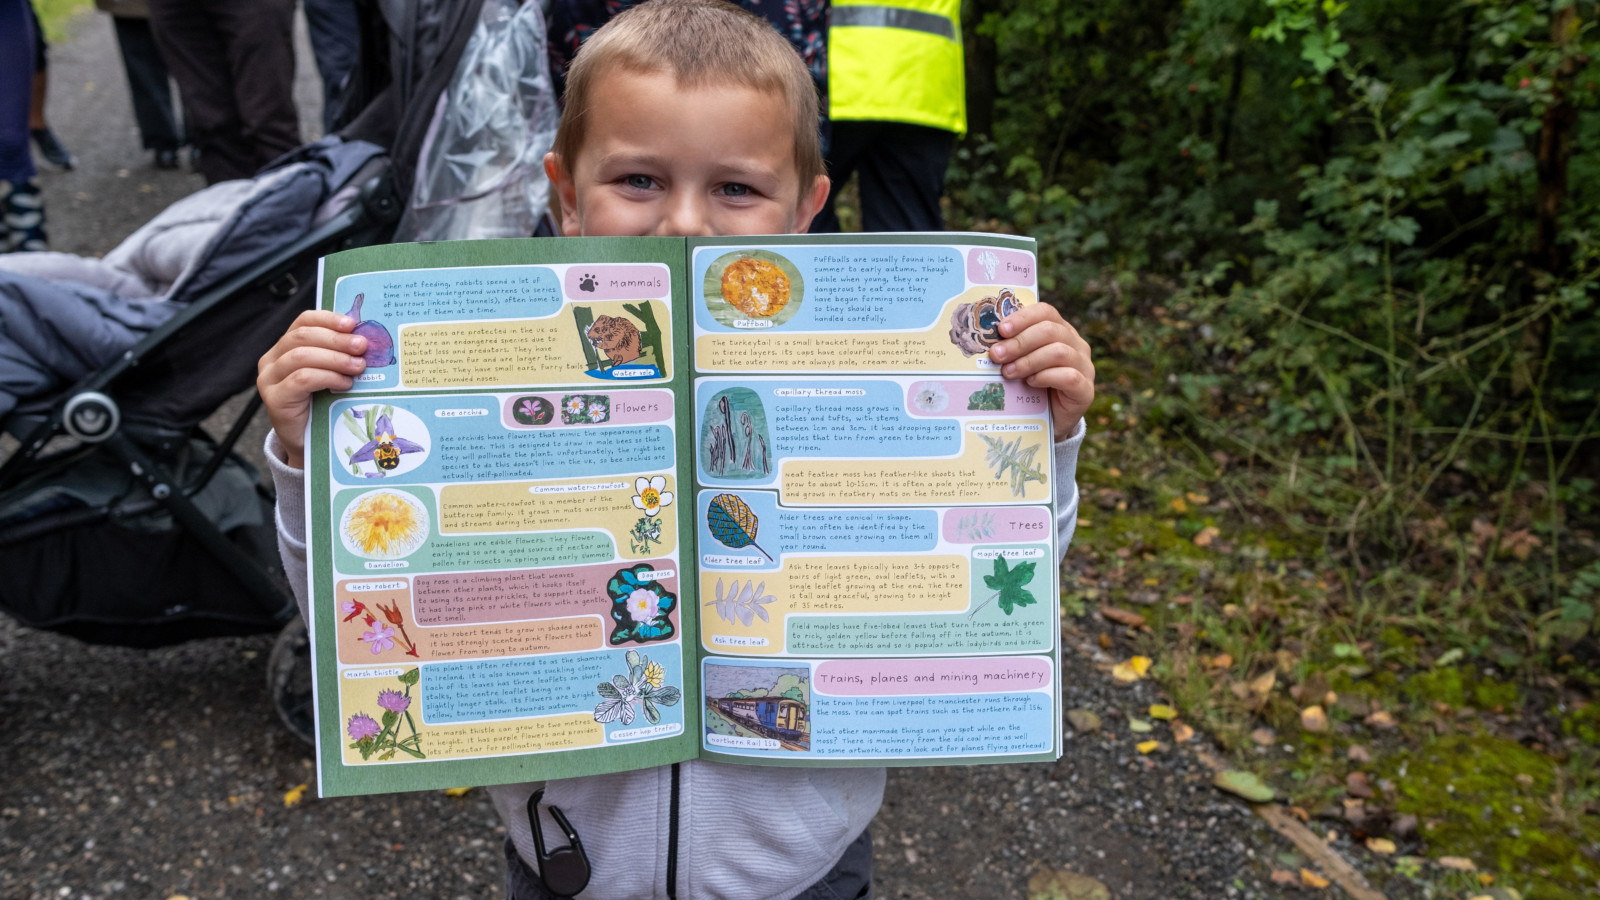 Photograph of a child holding open a colourful activity book